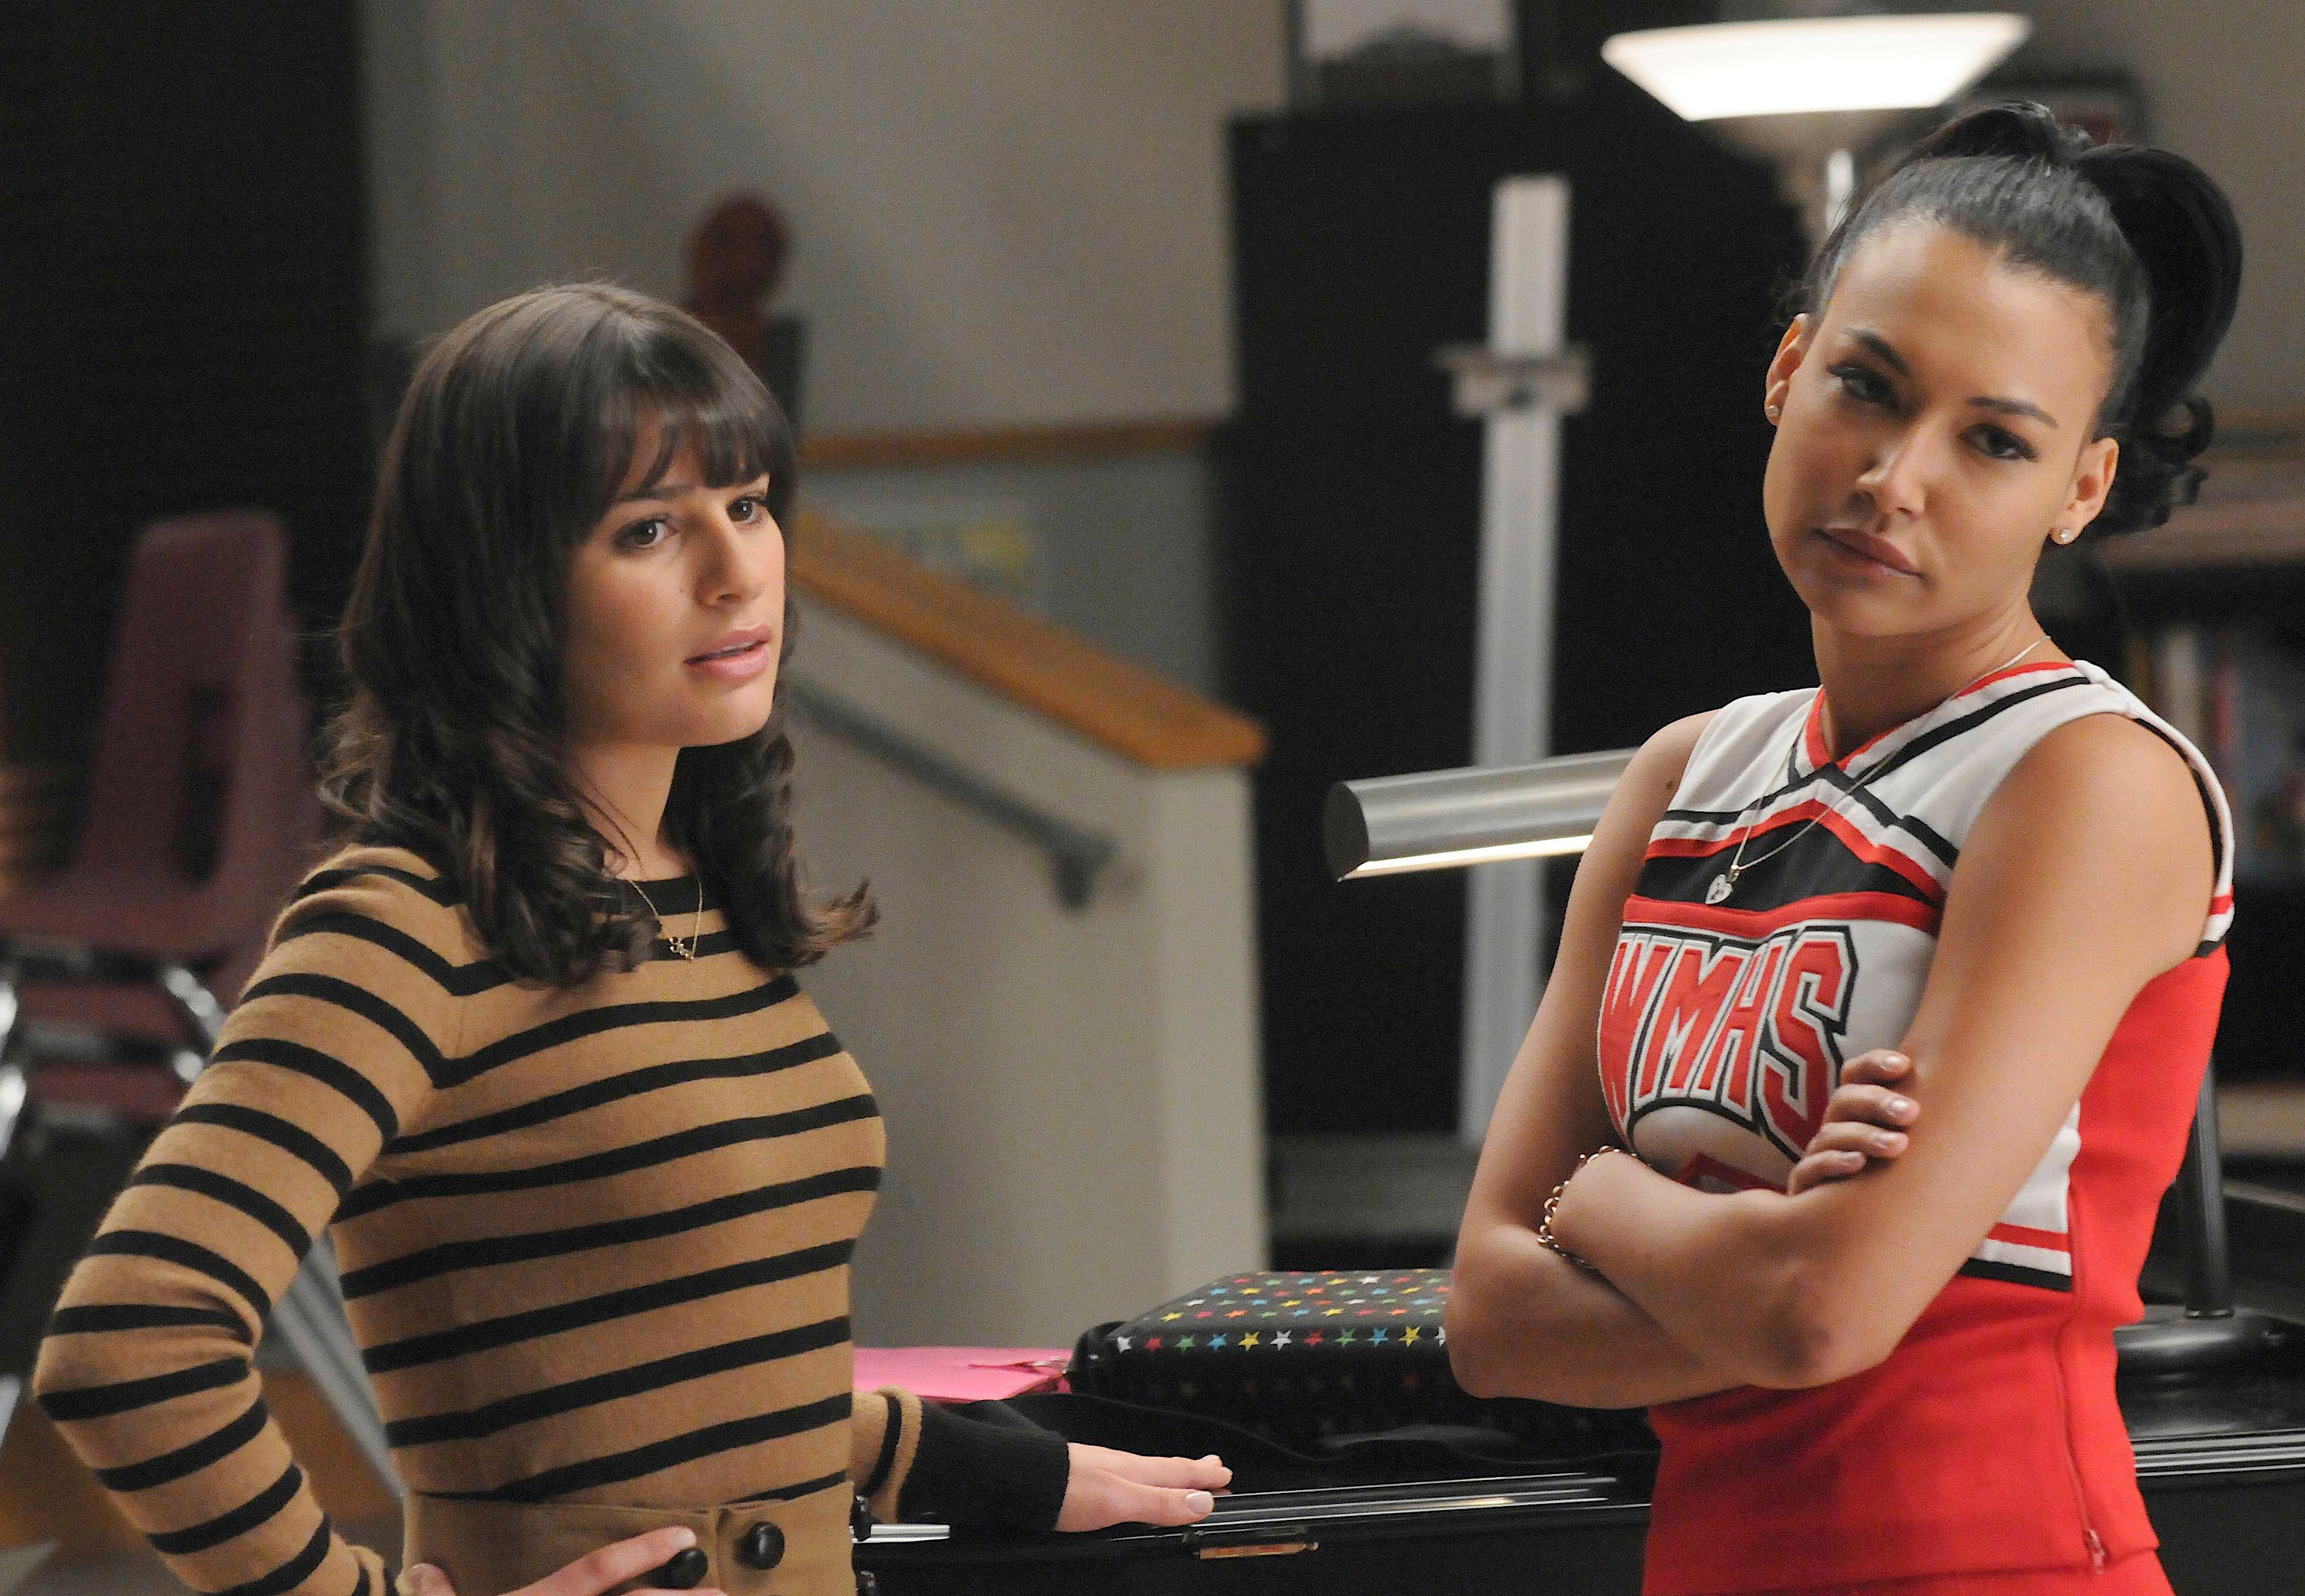 Lea Michele and Naya Rivera arguing in character on &quot;Glee&quot;